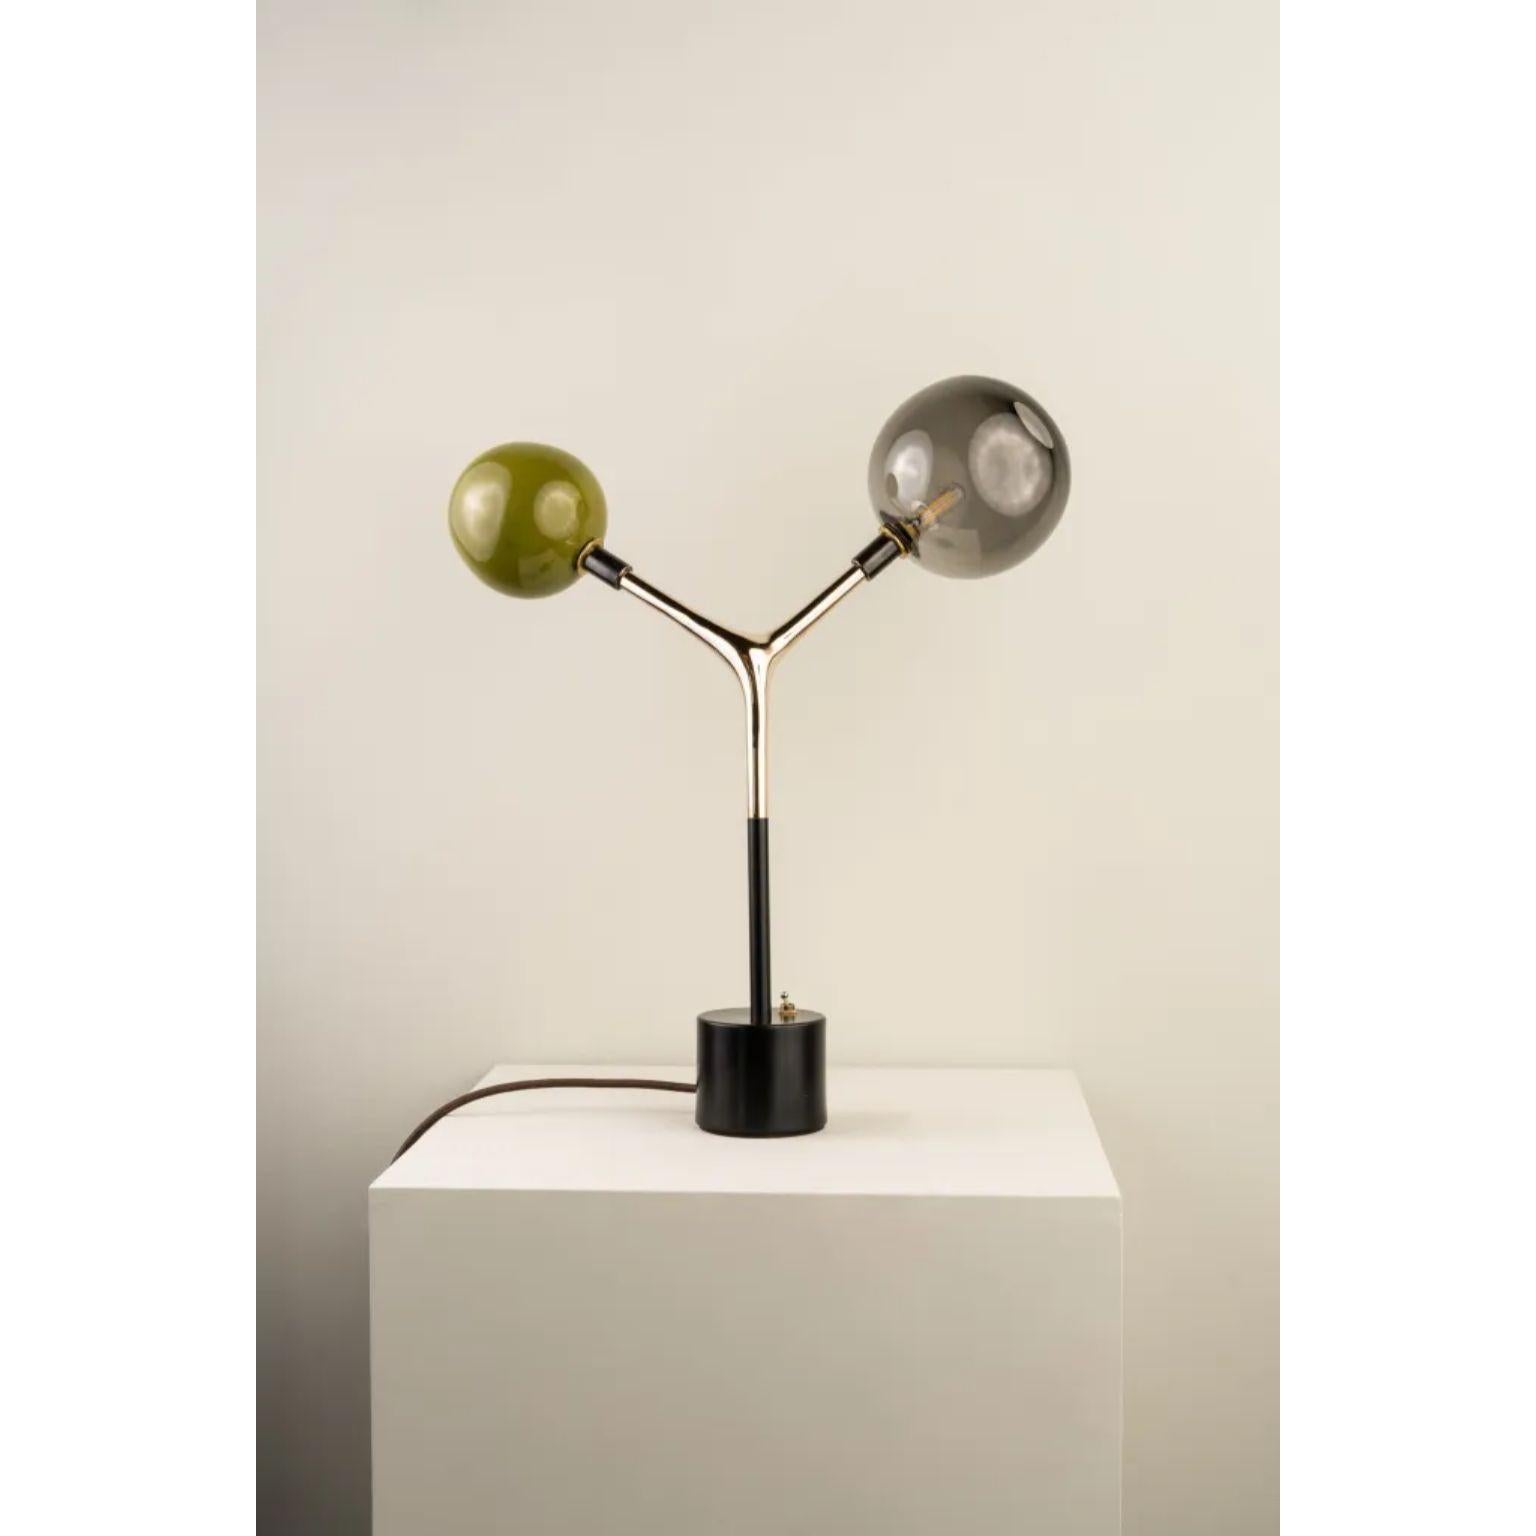 Olive and Smoke Mácula Table Lamp by Isabel Moncada
Dimensions: D 28 x W 46 x H 53.5 cm.
Materials: Cast bronze body, turned brass base, colored blown glass globes and rayon-lined cable.

Mácula, the organic and asymmetrical shape provides a simple